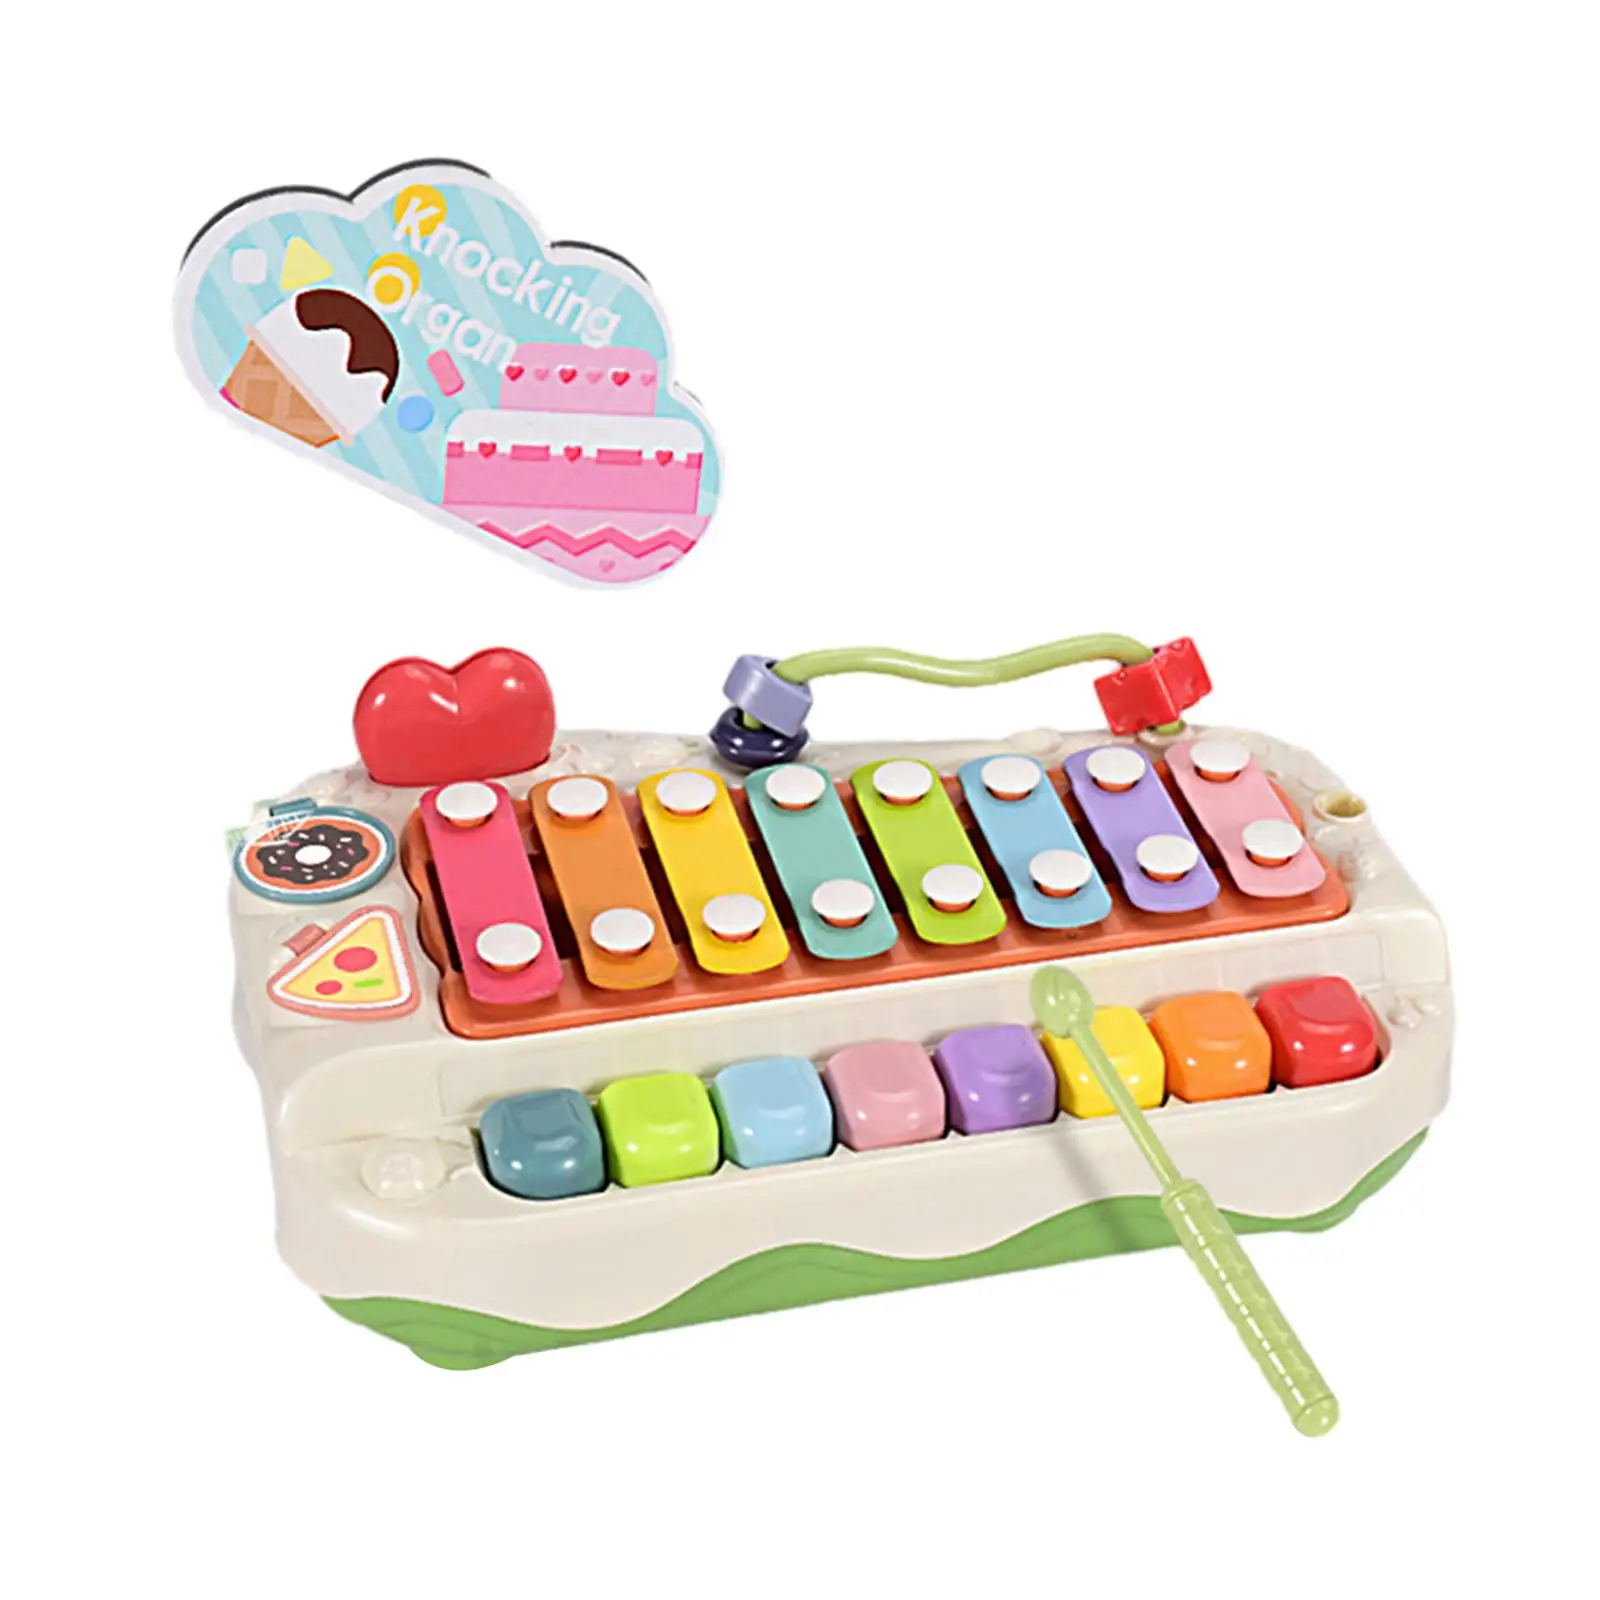 Kids Musical Toy Hammering Pounding Toys Motor Skills Montessori Multicolored Hand Knocking Piano for 1 2 3 Years Old Kids